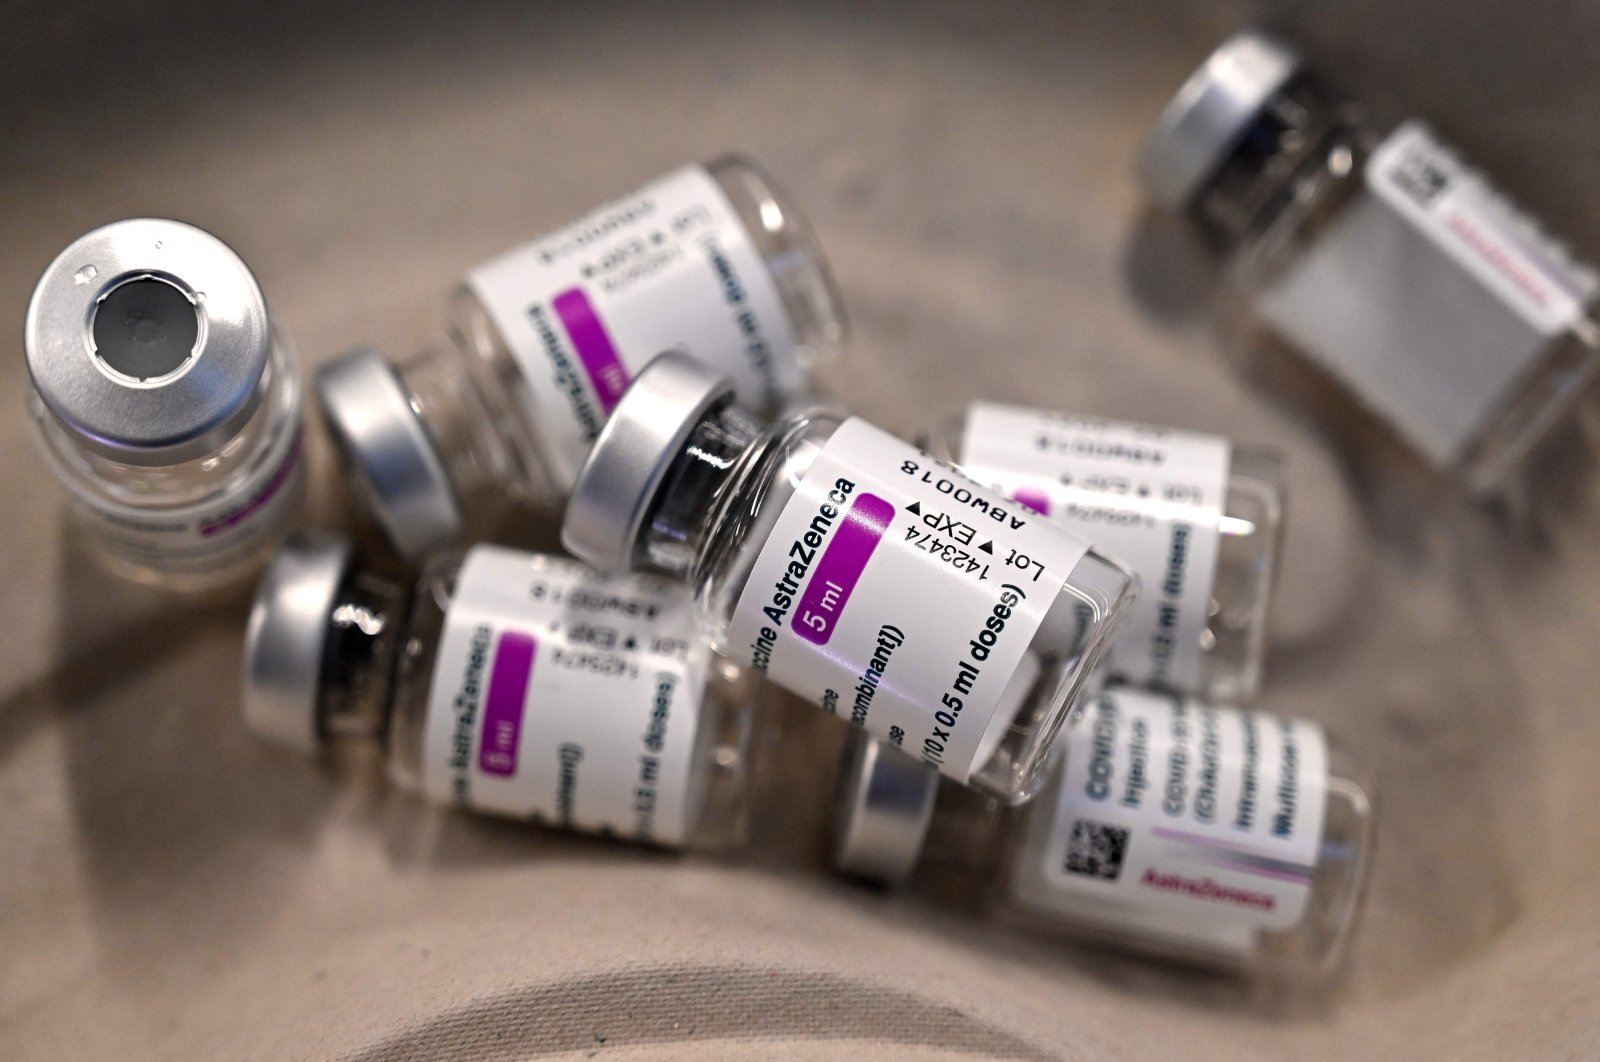 Used vials of the AstraZeneca/Oxford vaccine are pictured at a COVID-19 vaccination center at at the Wanda Metropolitano stadium in Madrid, Spain, March 24, 2021. (AFP Photo)